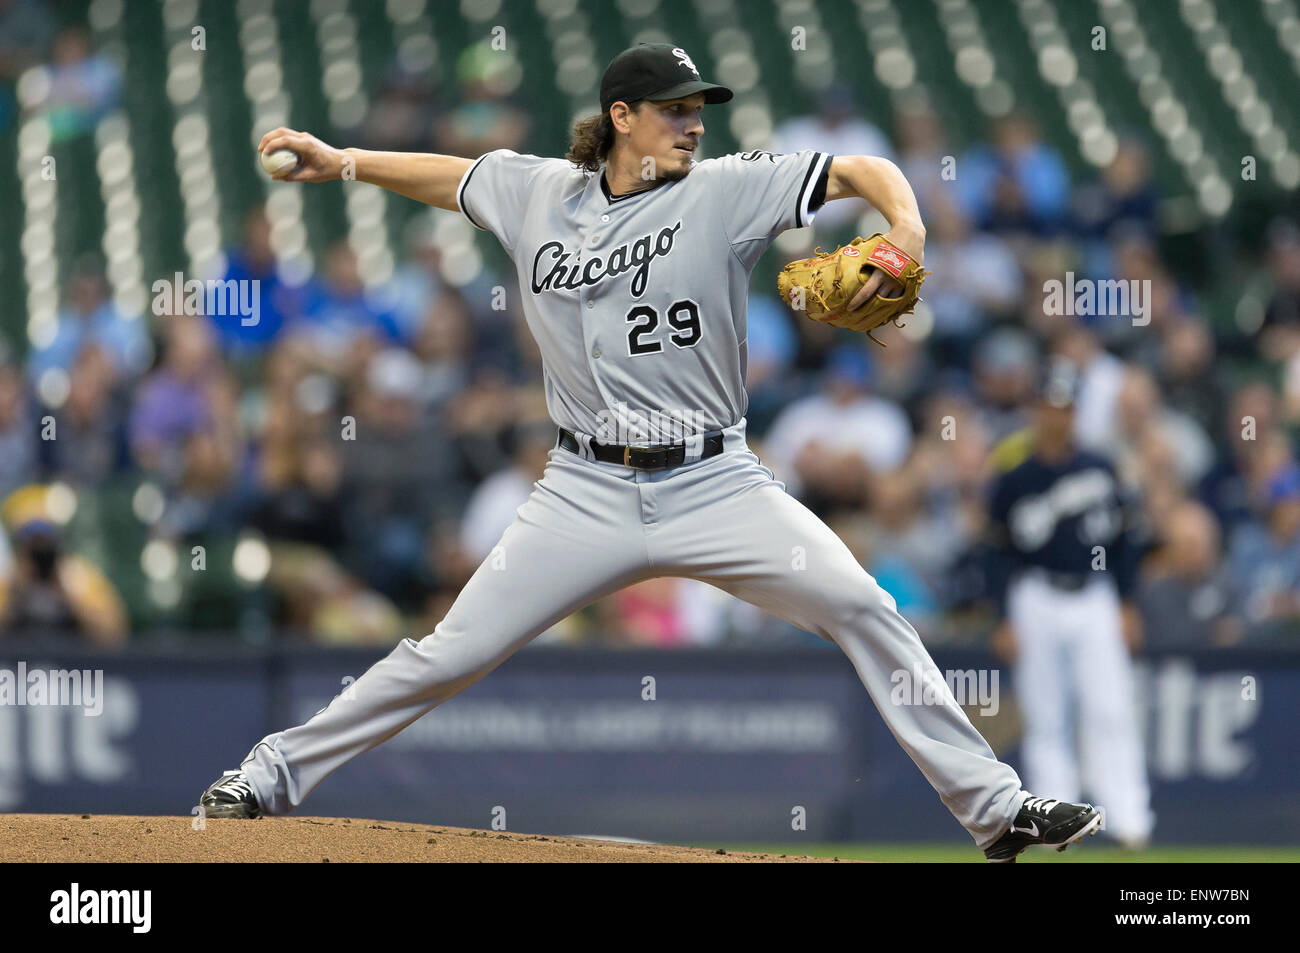 Milwaukee, WI, USA. 11th May, 2015. Chicago White Sox starting pitcher Jeff Samardzija #29 delivers a pitch during the Major League Baseball game between the Milwaukee Brewers and the Chicago White Sox at Miller Park in Milwaukee, WI. John Fisher/CSM/Alamy Live News Stock Photo